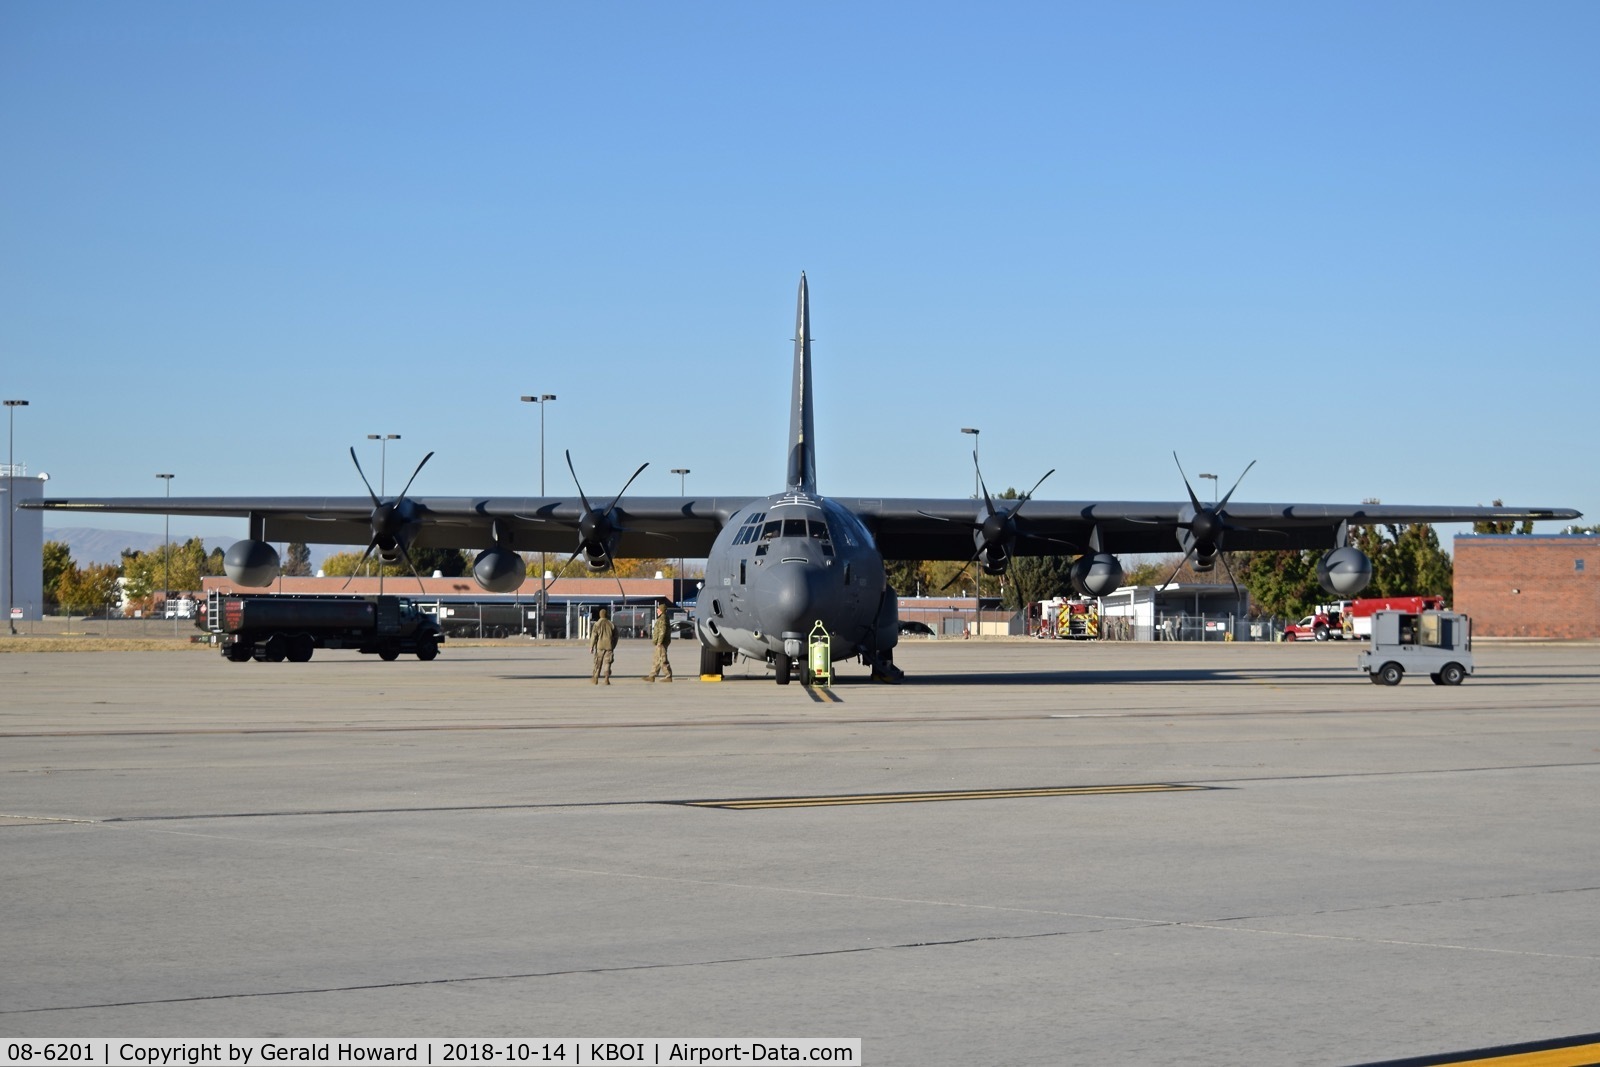 08-6201, 2008 Lockheed Martin MC-130J Commando II C/N 382-5680, 27th Special OPS Wing, 522nd Special OPS Sq., Cannon AFB, NM.